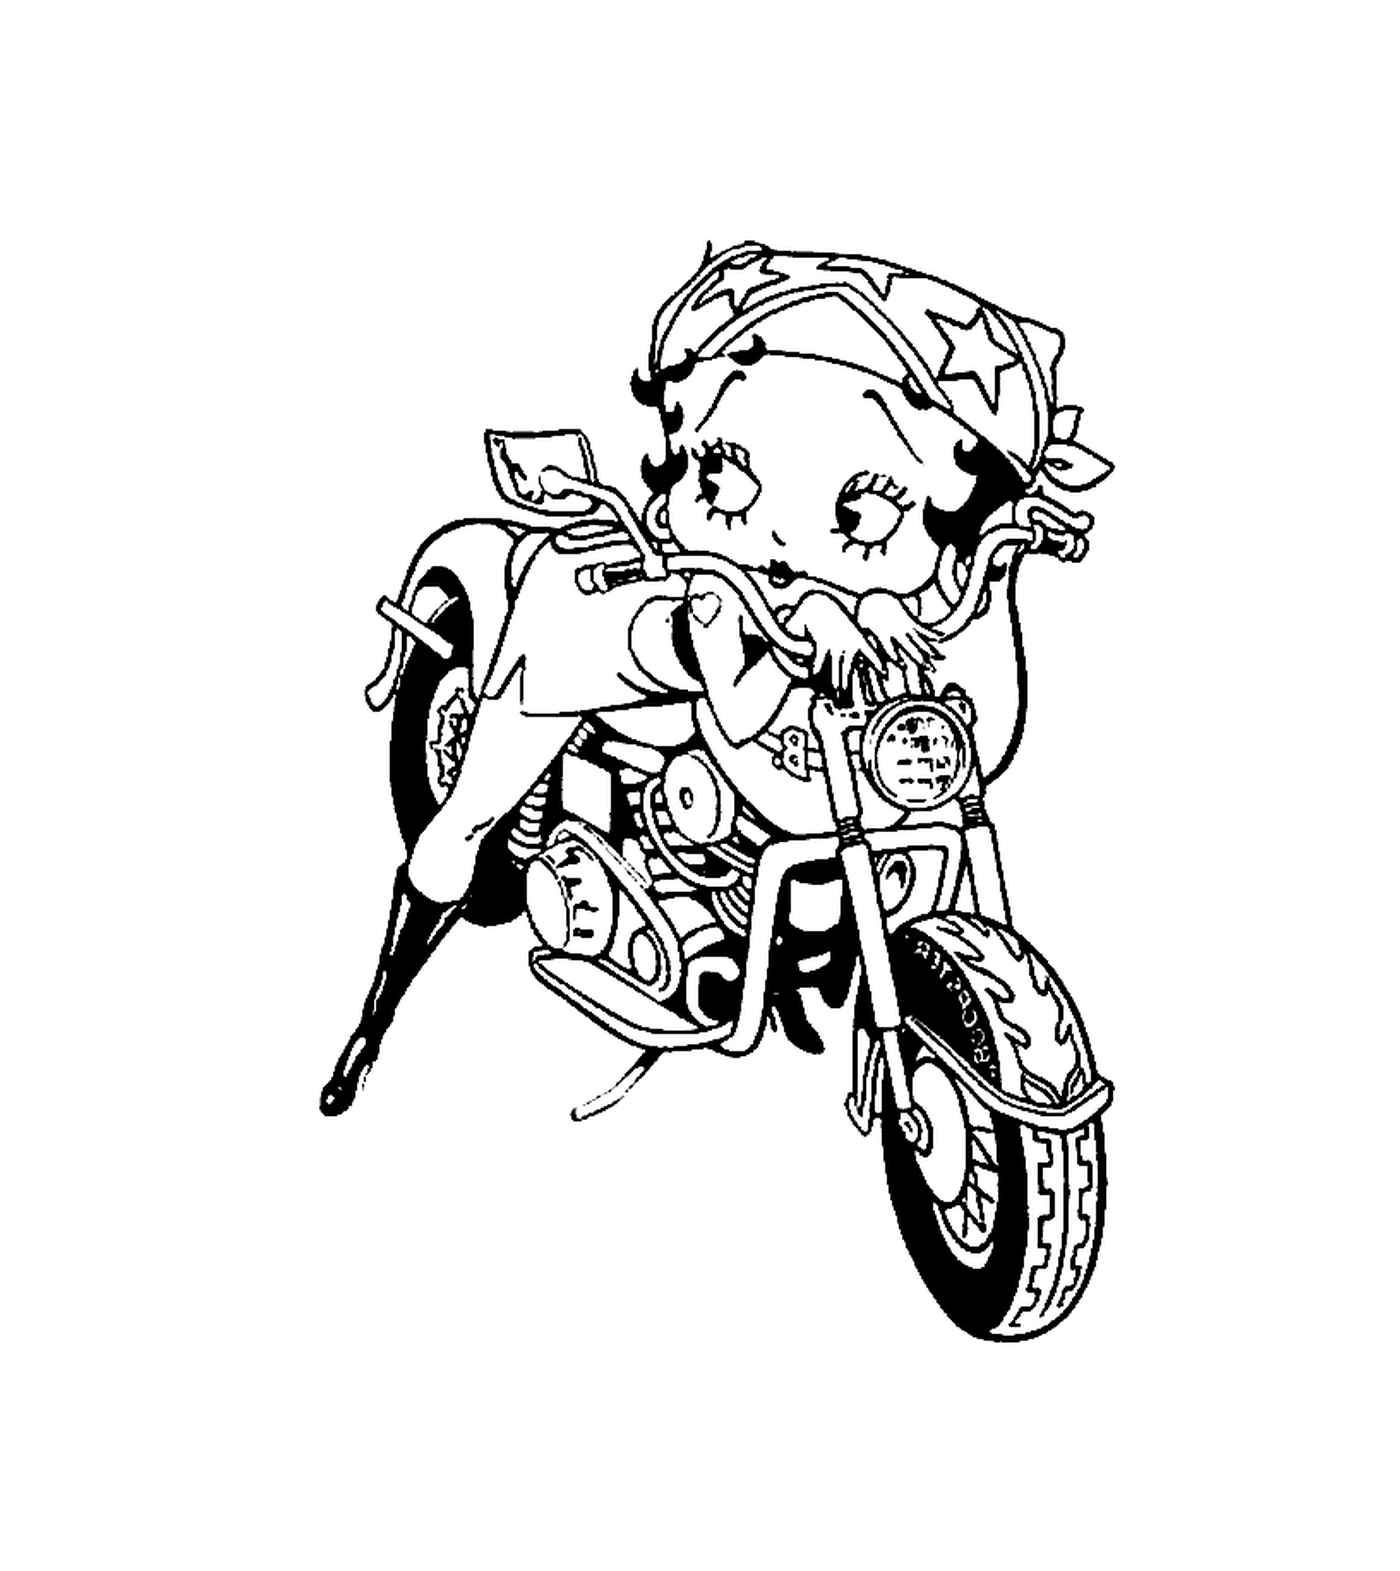  Betty Boop sitting on a motorcycle 